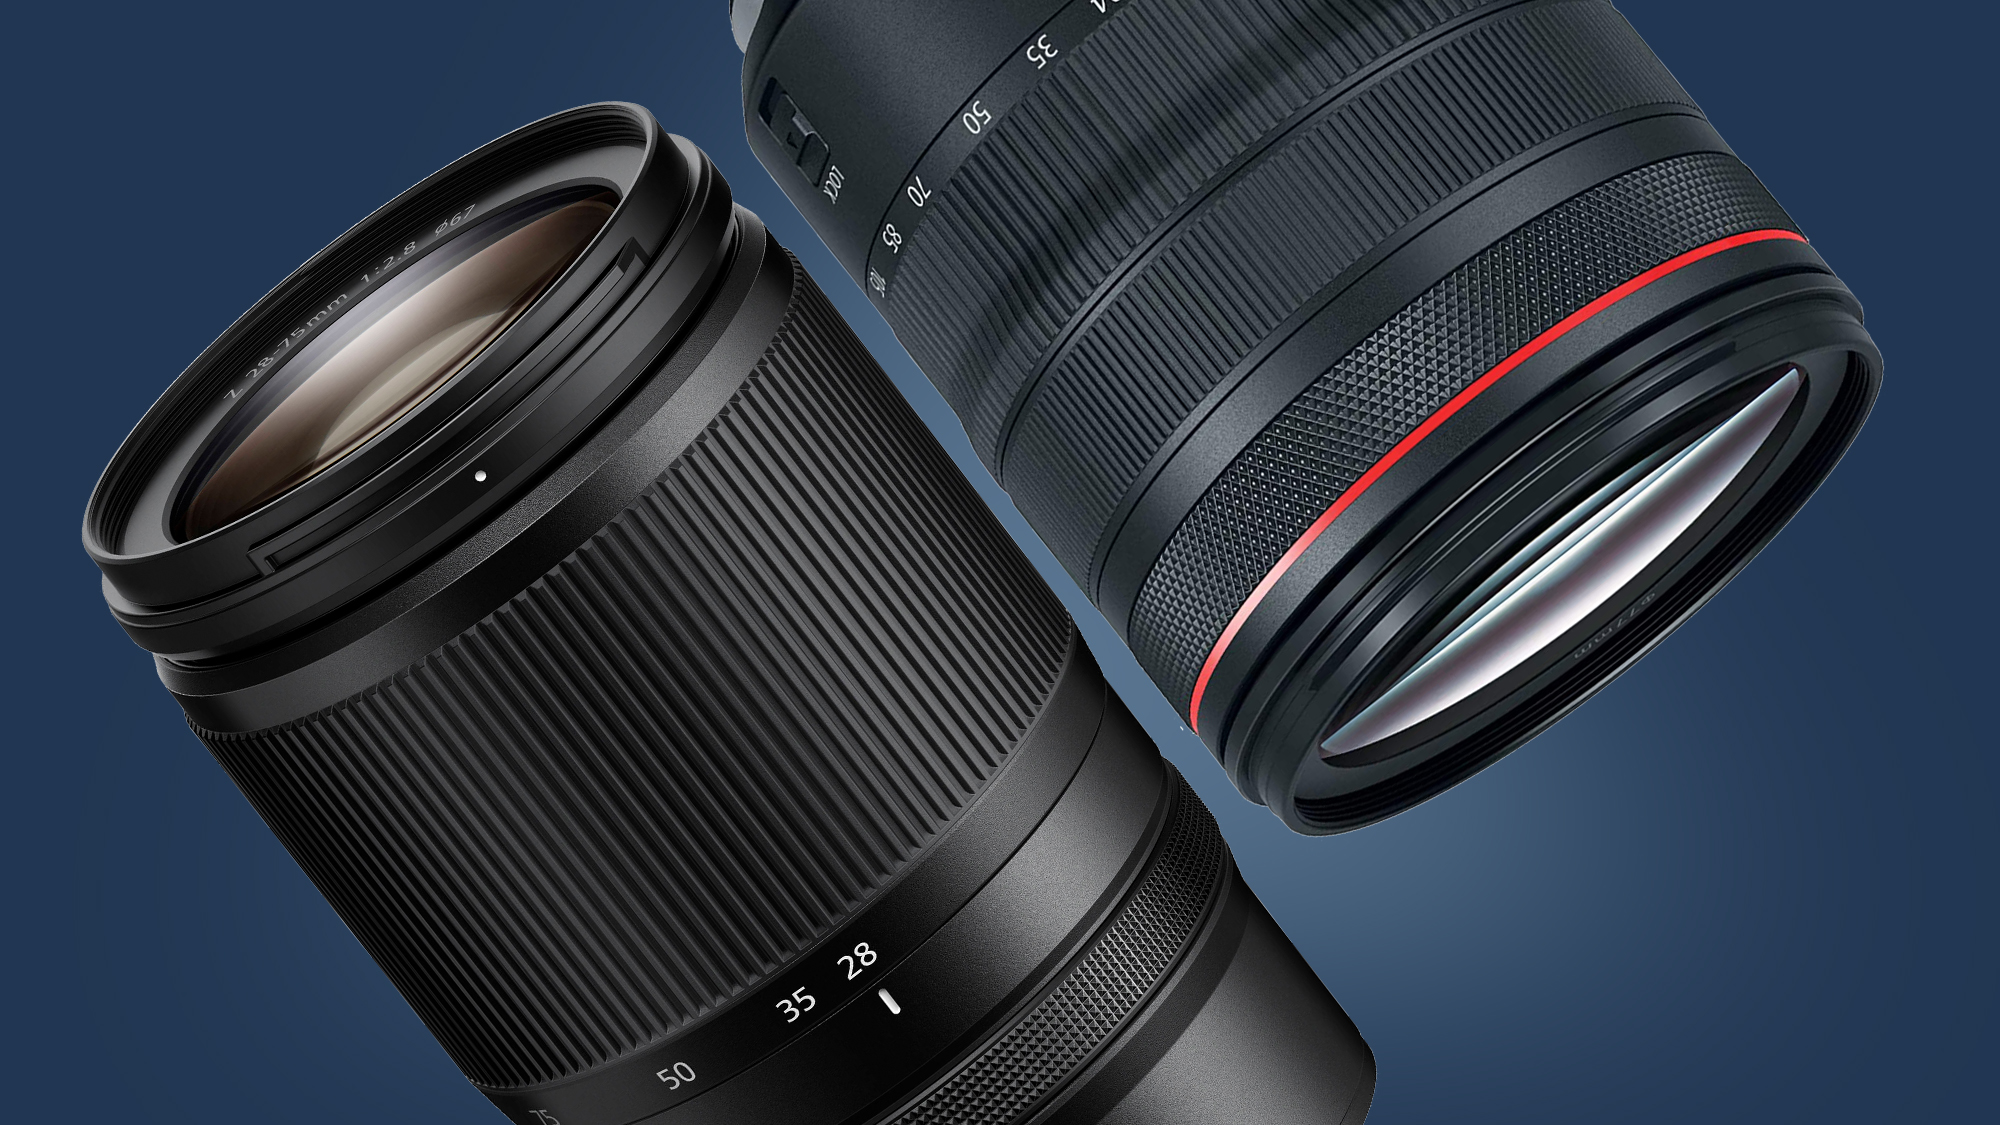 Canon and Nikon camera lenses are about to get a lot more expensive